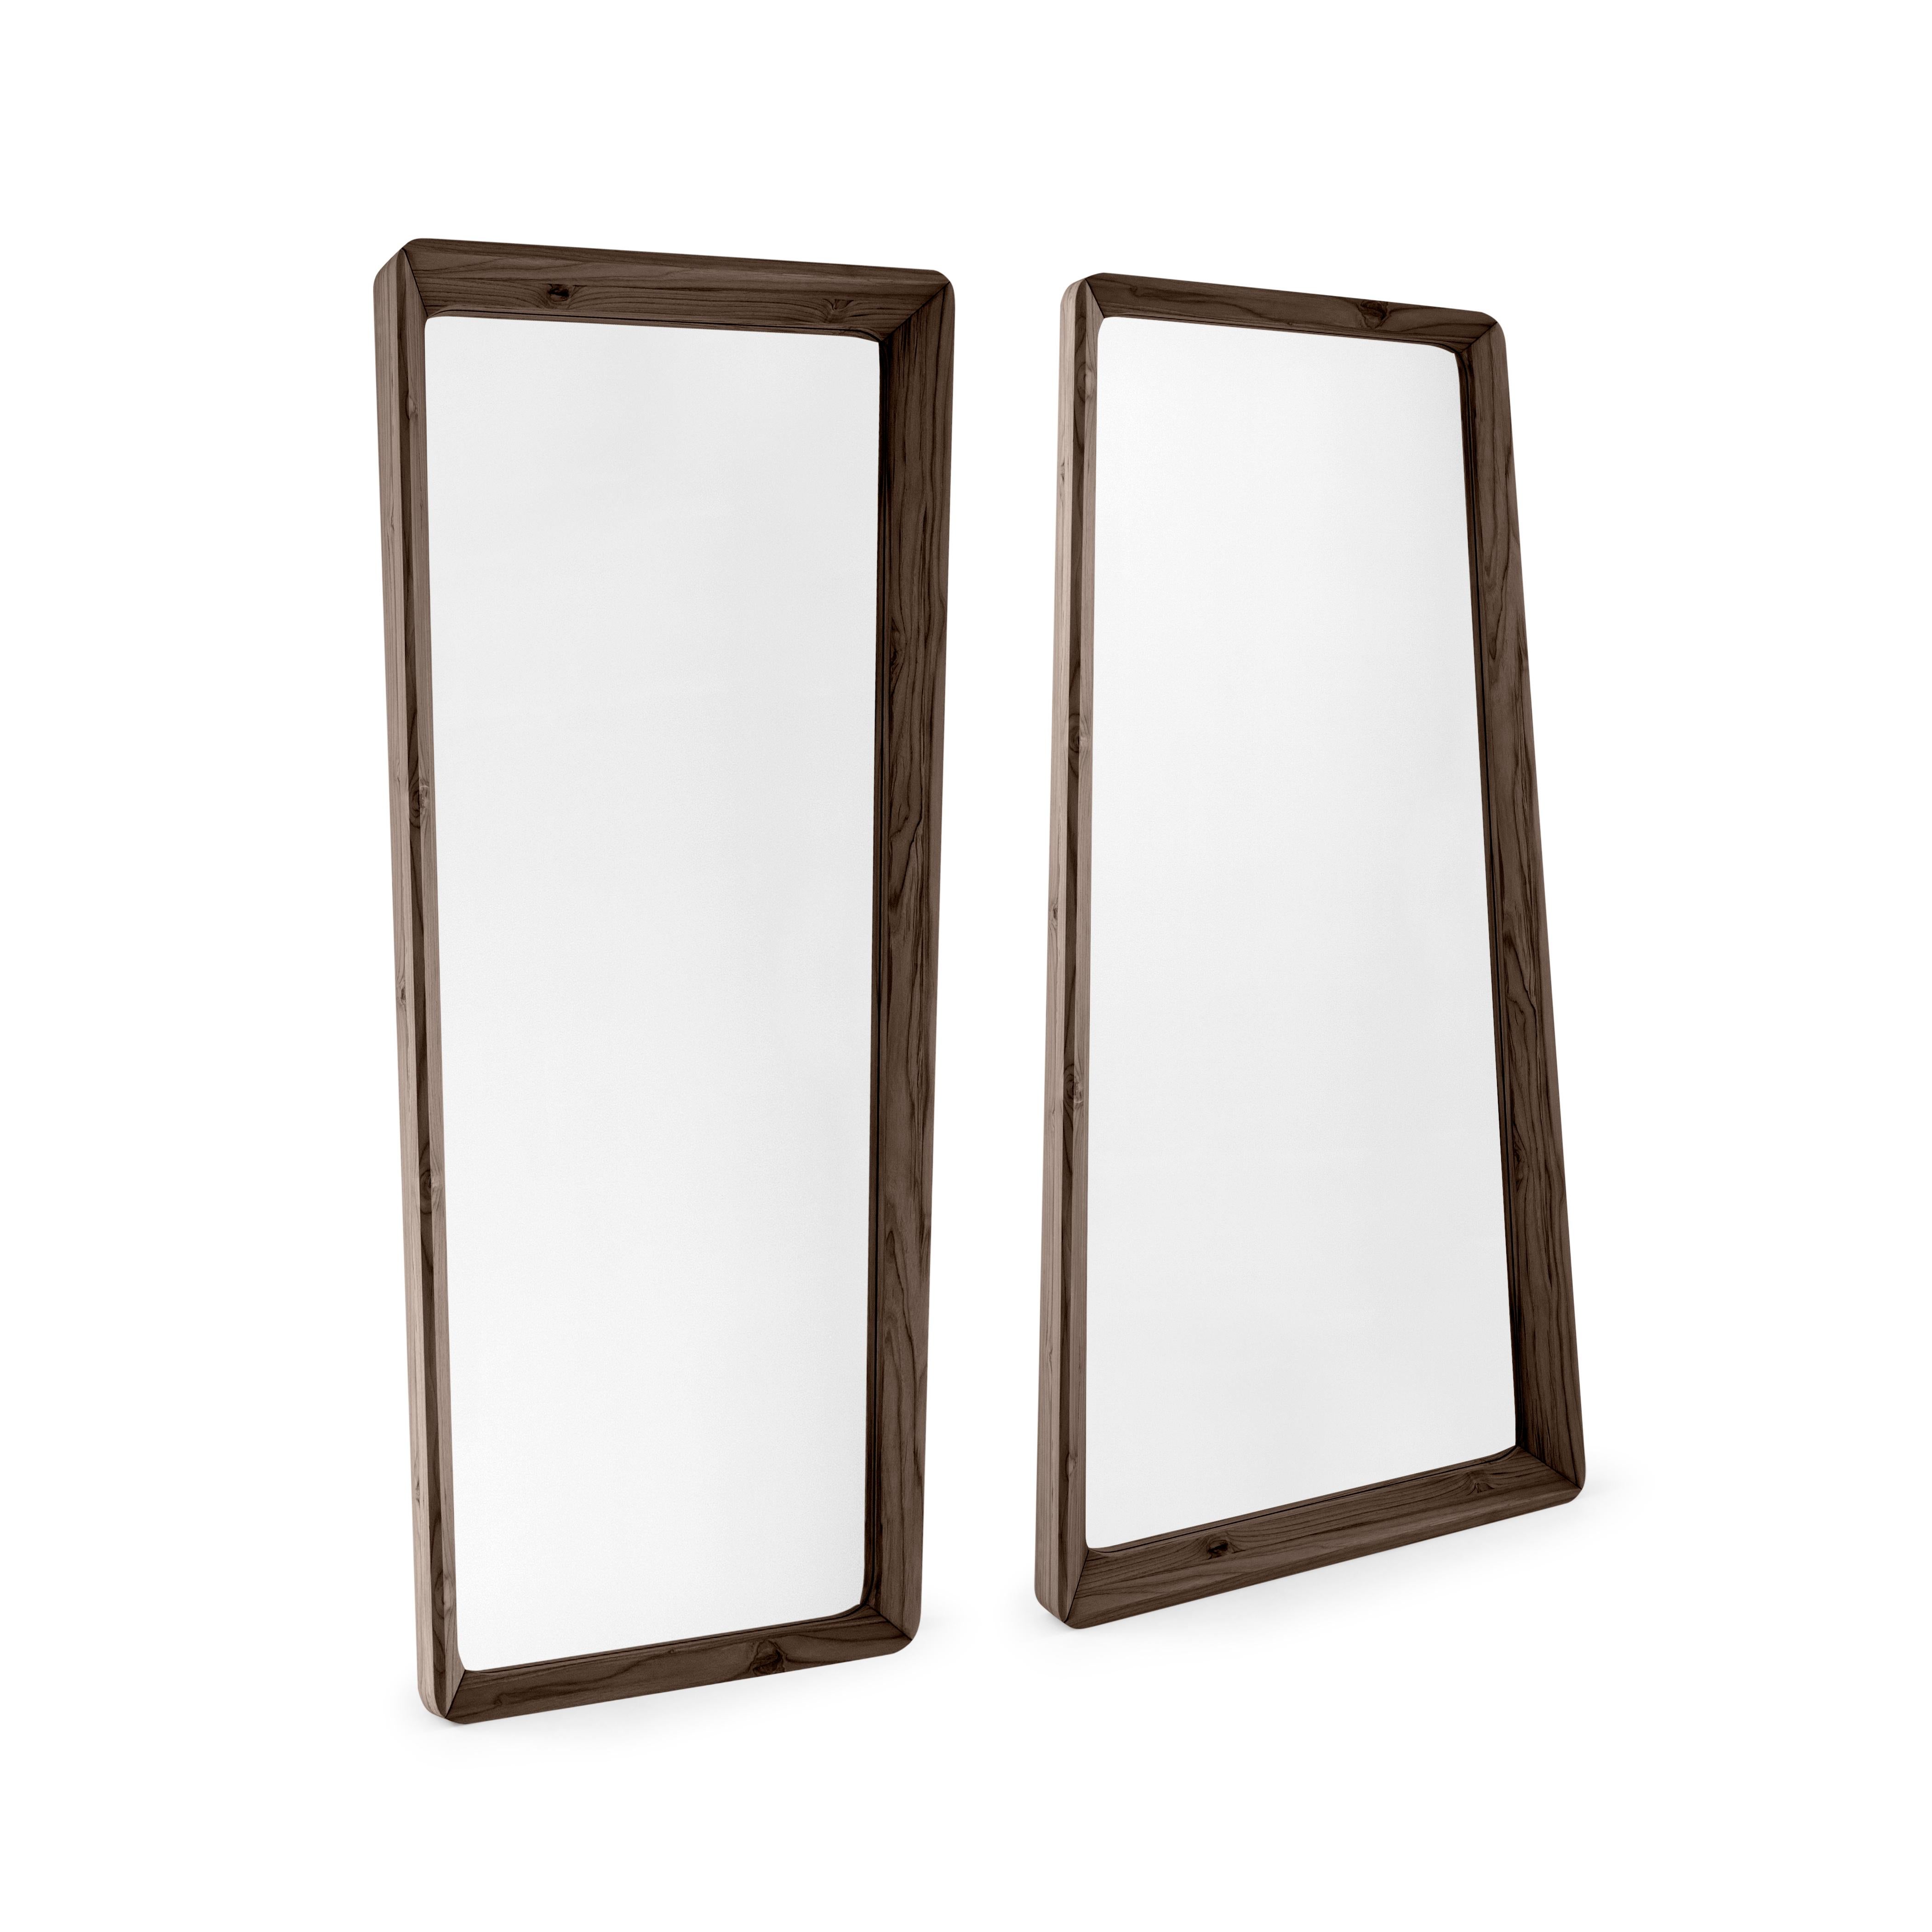 The Duomo full-length mirror adds refinement and elegance to any environment. The walnut solid wood finish frame with soft corners gives the Duomo its own identity. This mirror was designed by our amazing Uultis Design team in order to use this